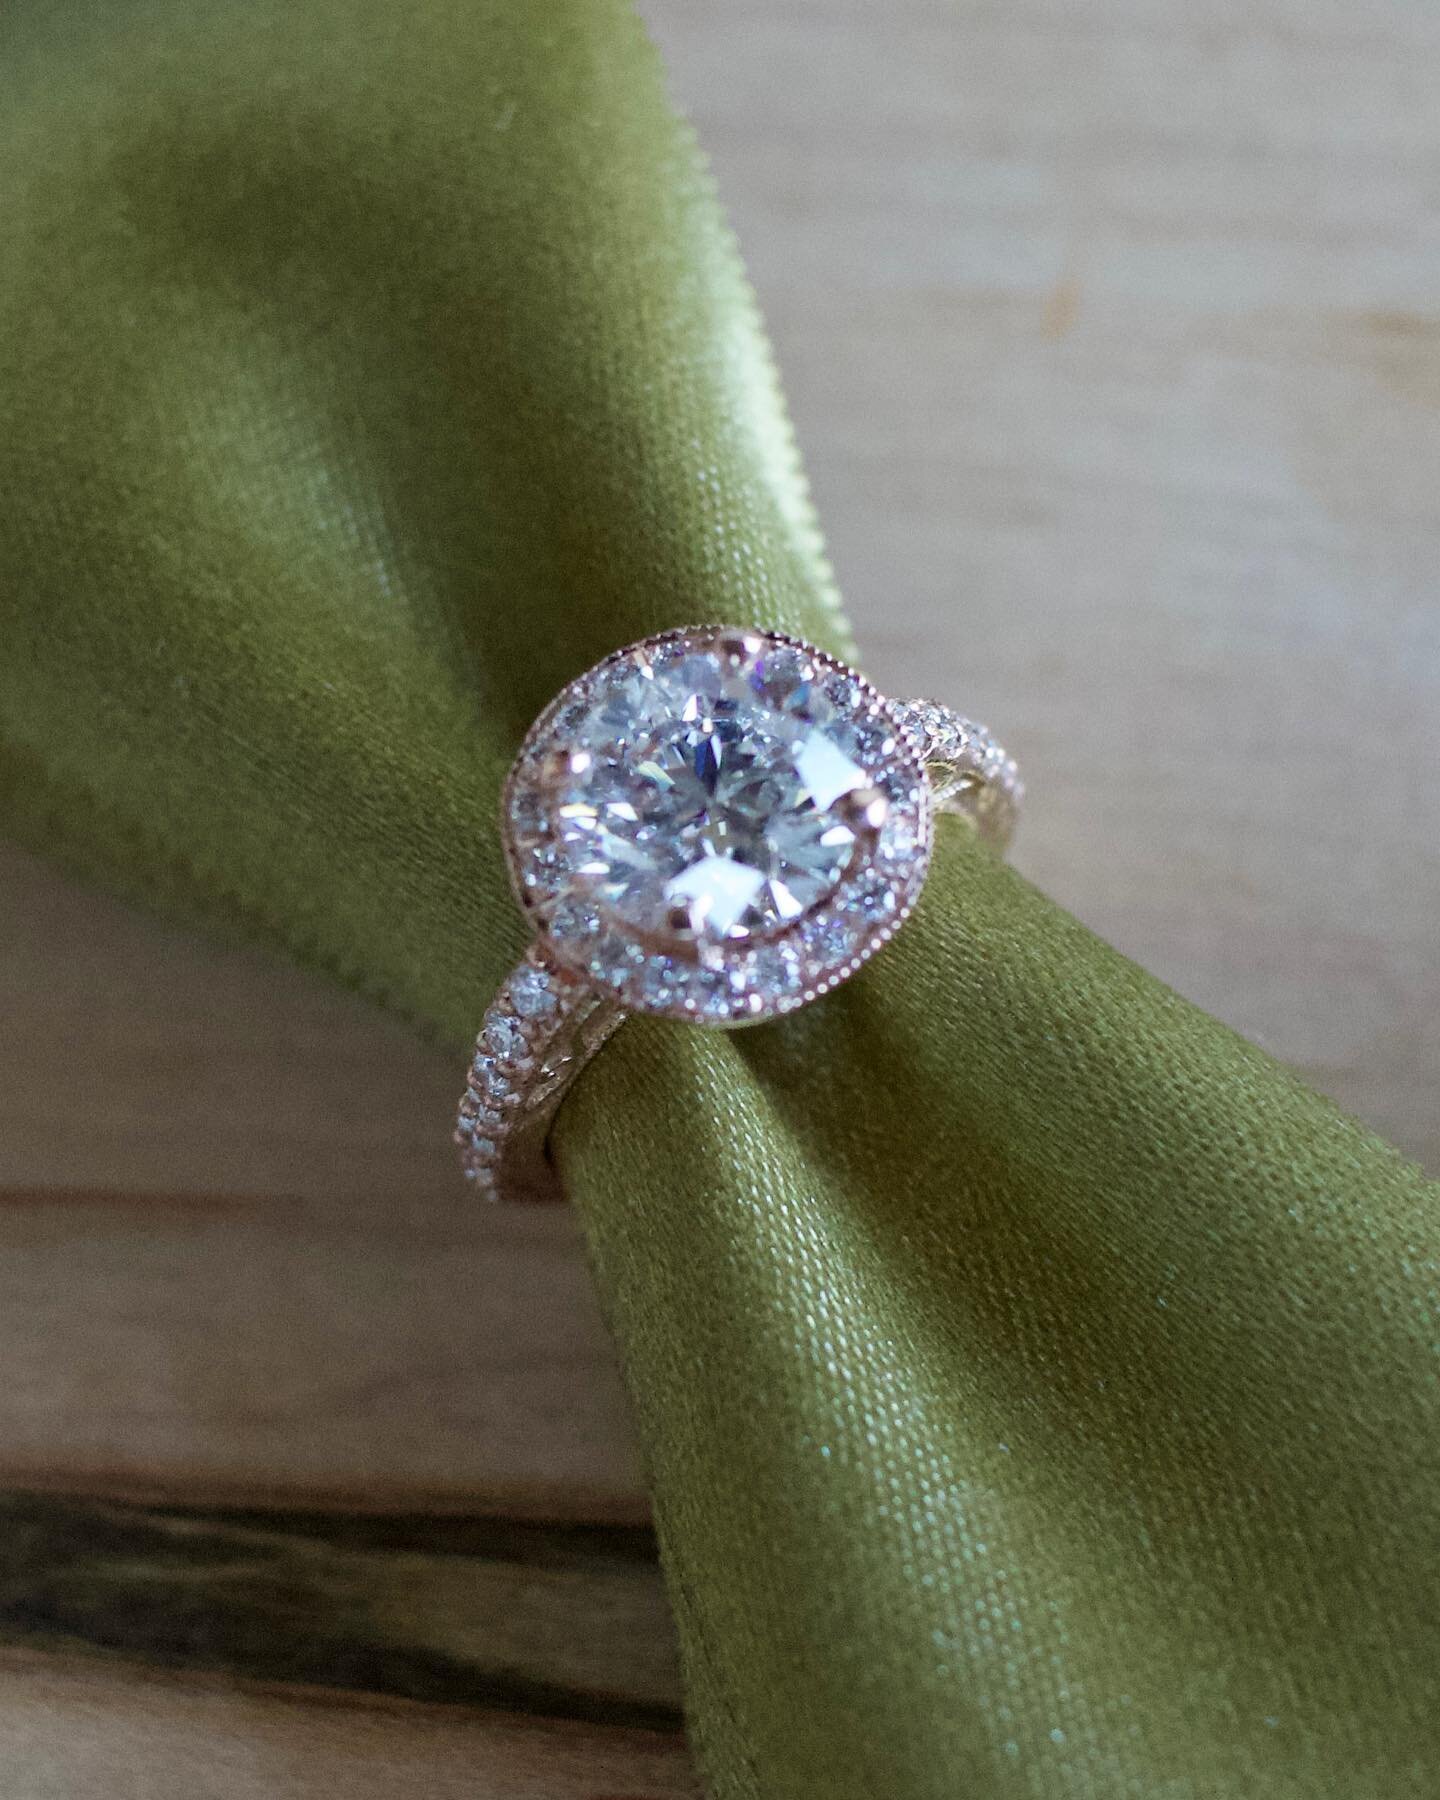 A perfect way to ring in the New Year 💍

#engagementring #halosetting #rosegold #ohwowyes #customjewelry #diamondring